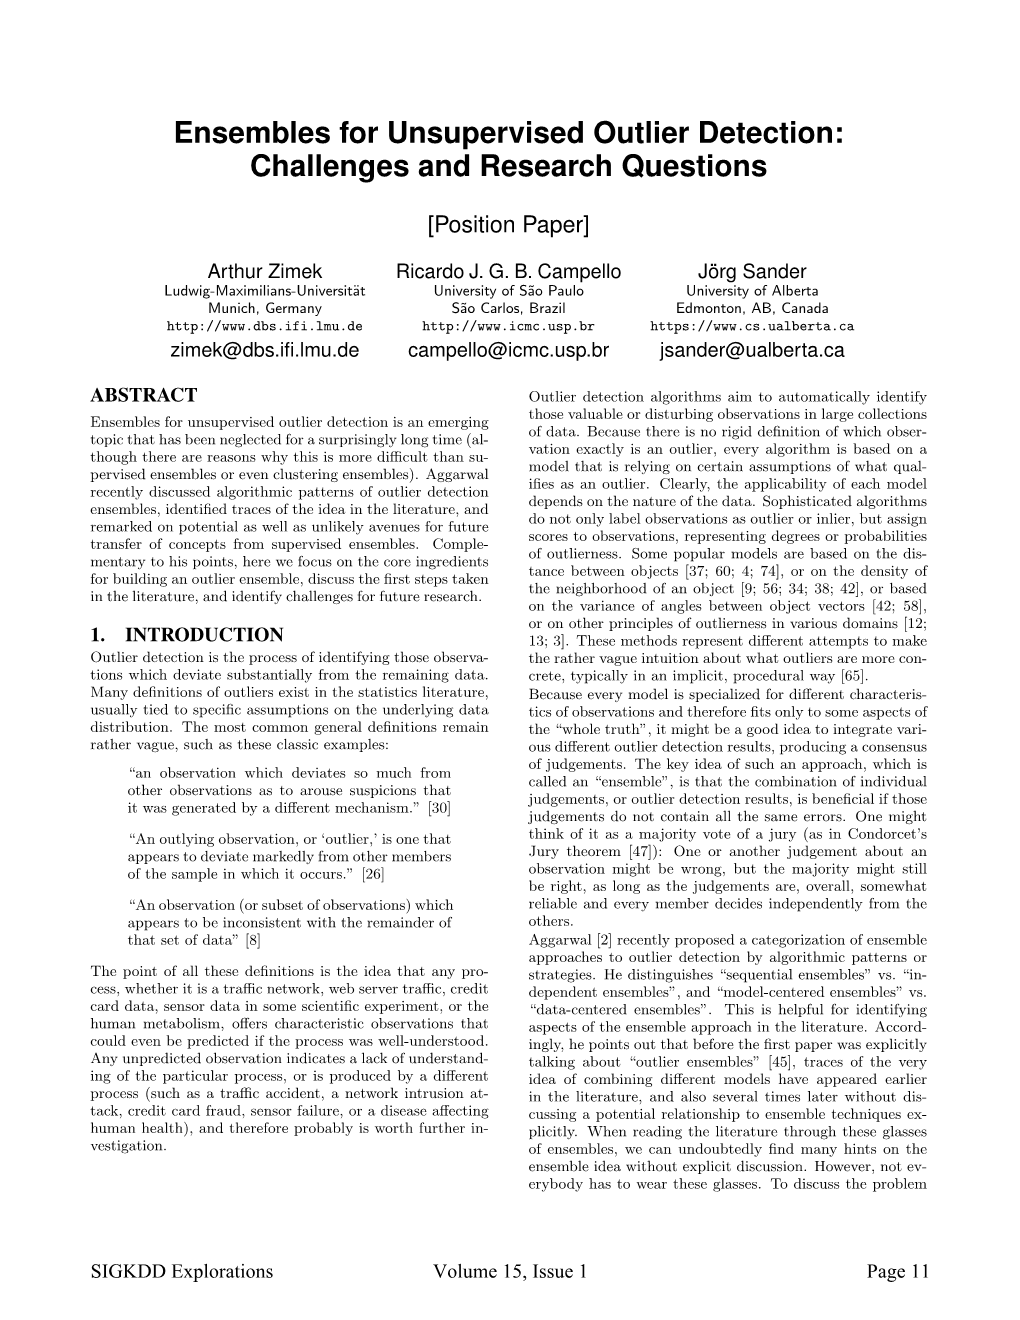 Ensembles for Unsupervised Outlier Detection: Challenges and Research Questions